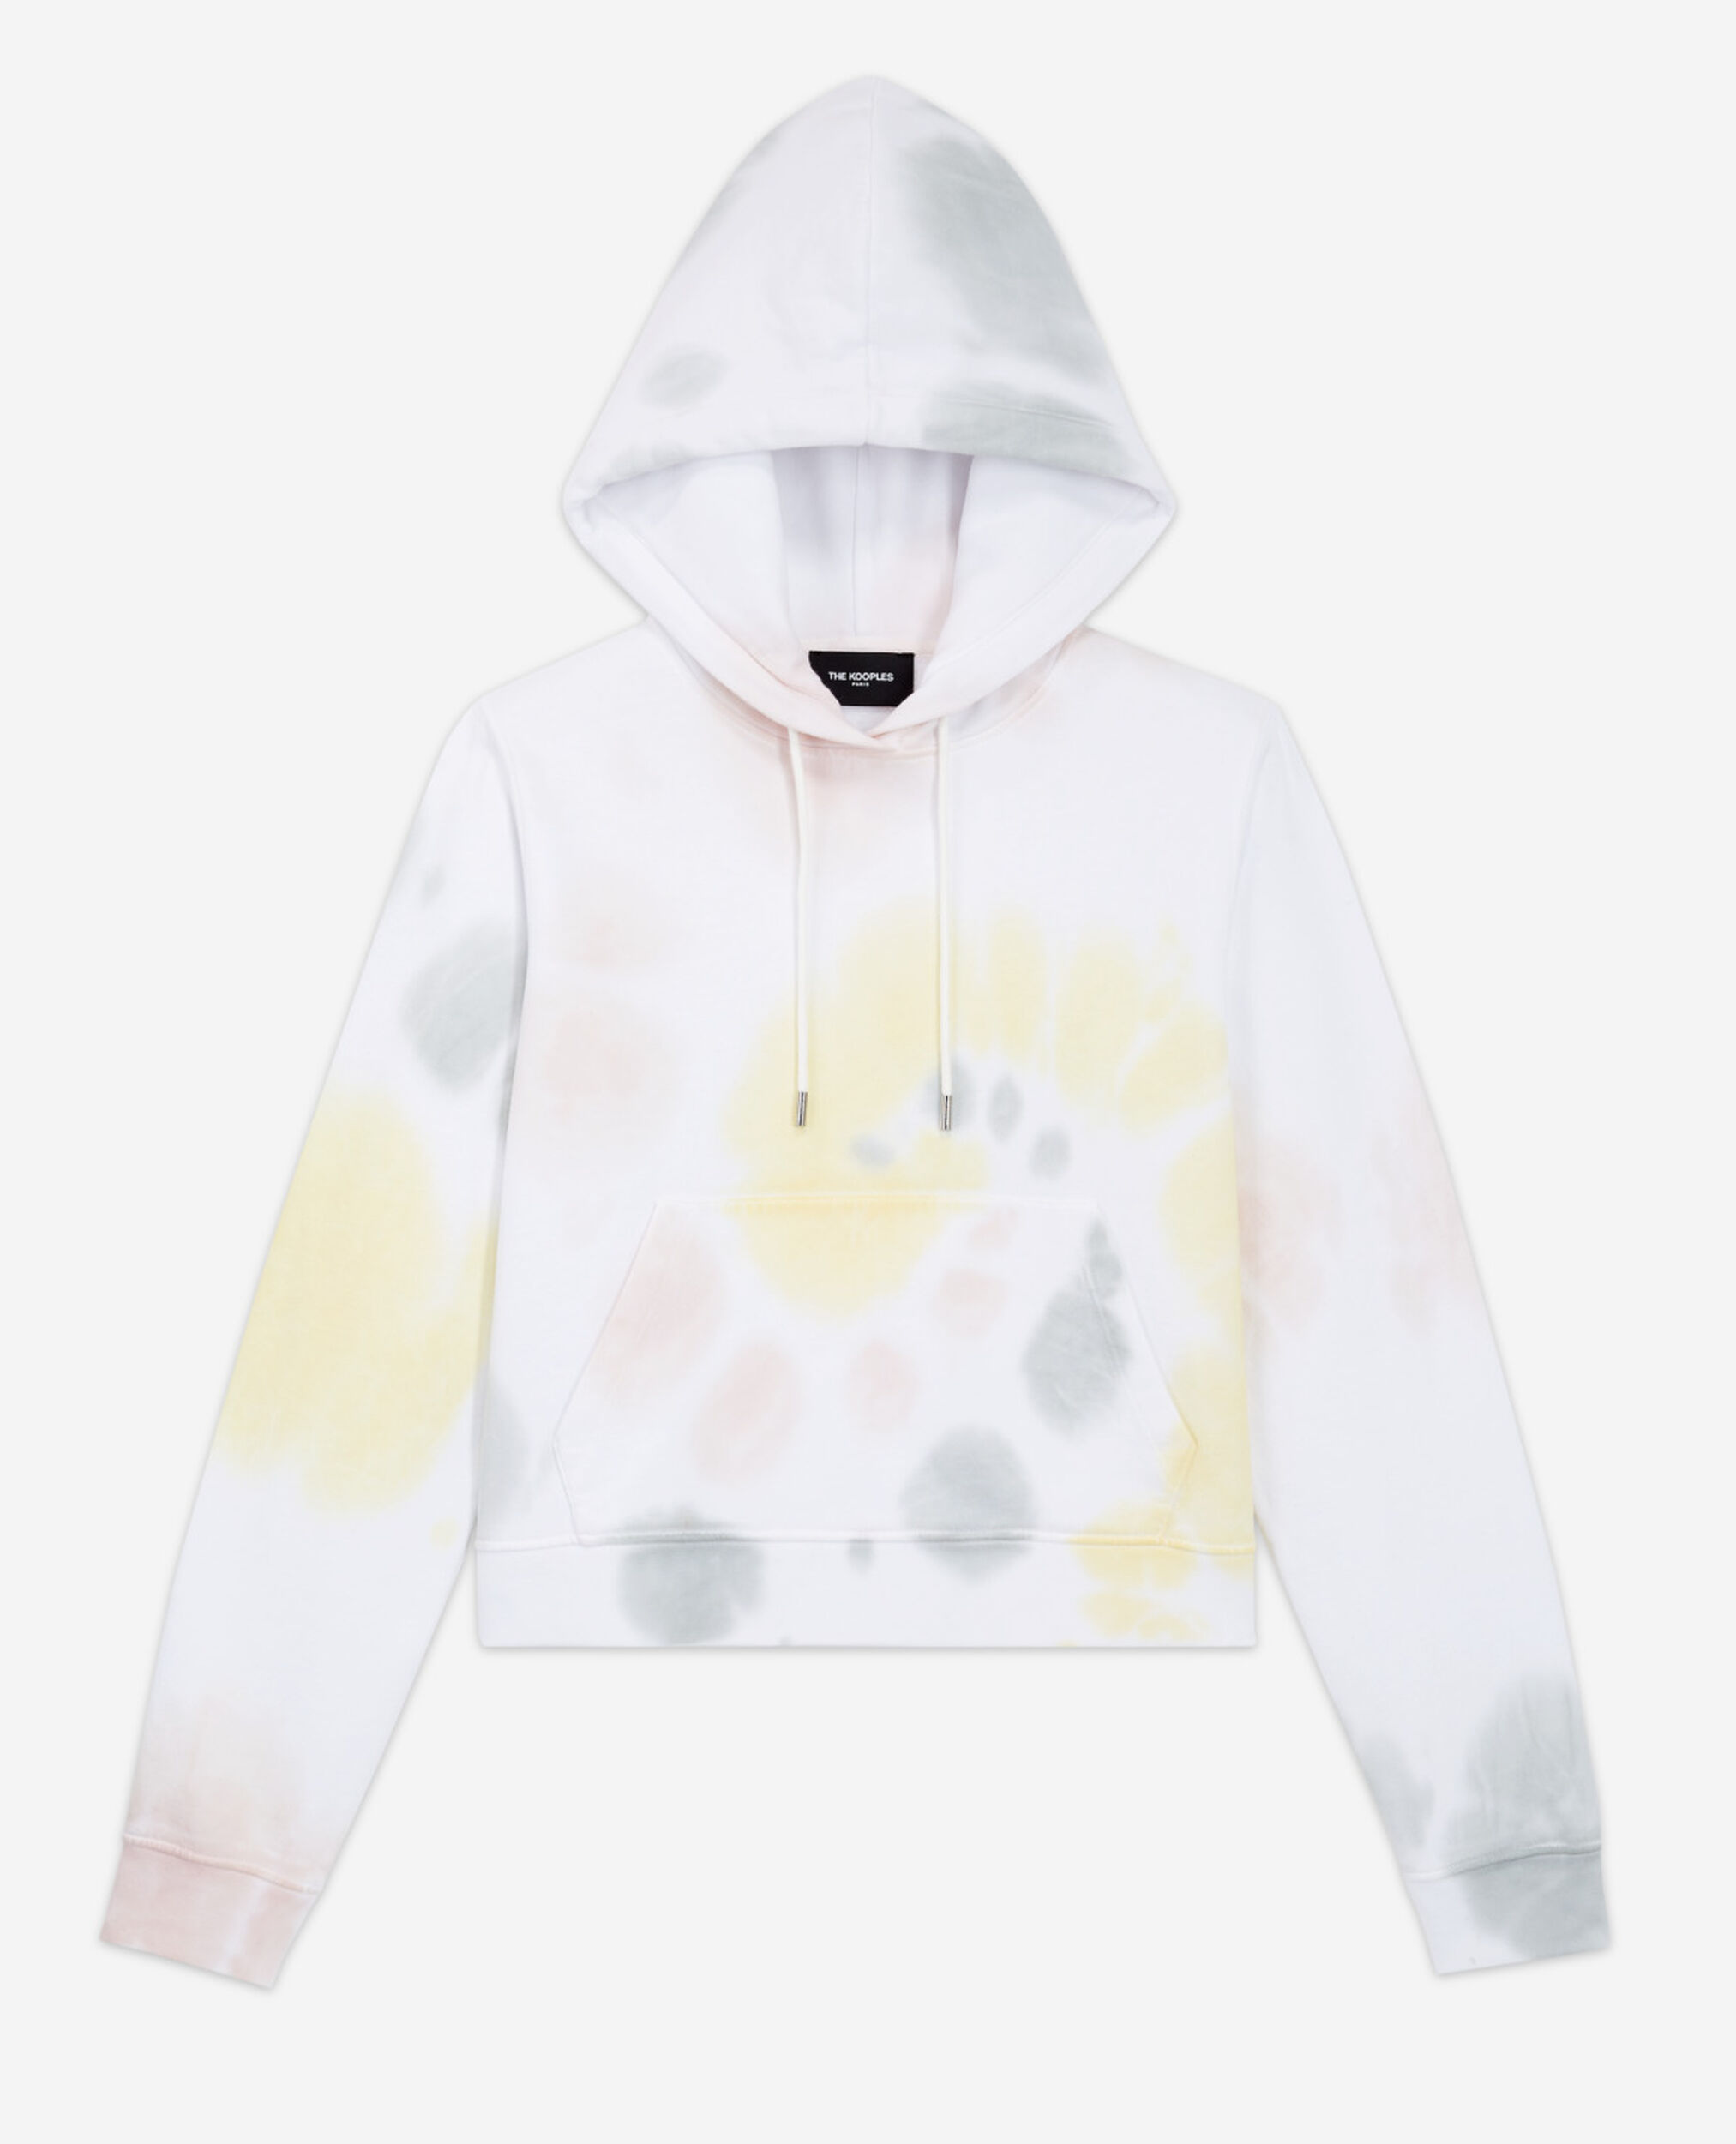 Sweat multicolore coton effet tie - dye, TIE AND DYE MULTICO, hi-res image number null